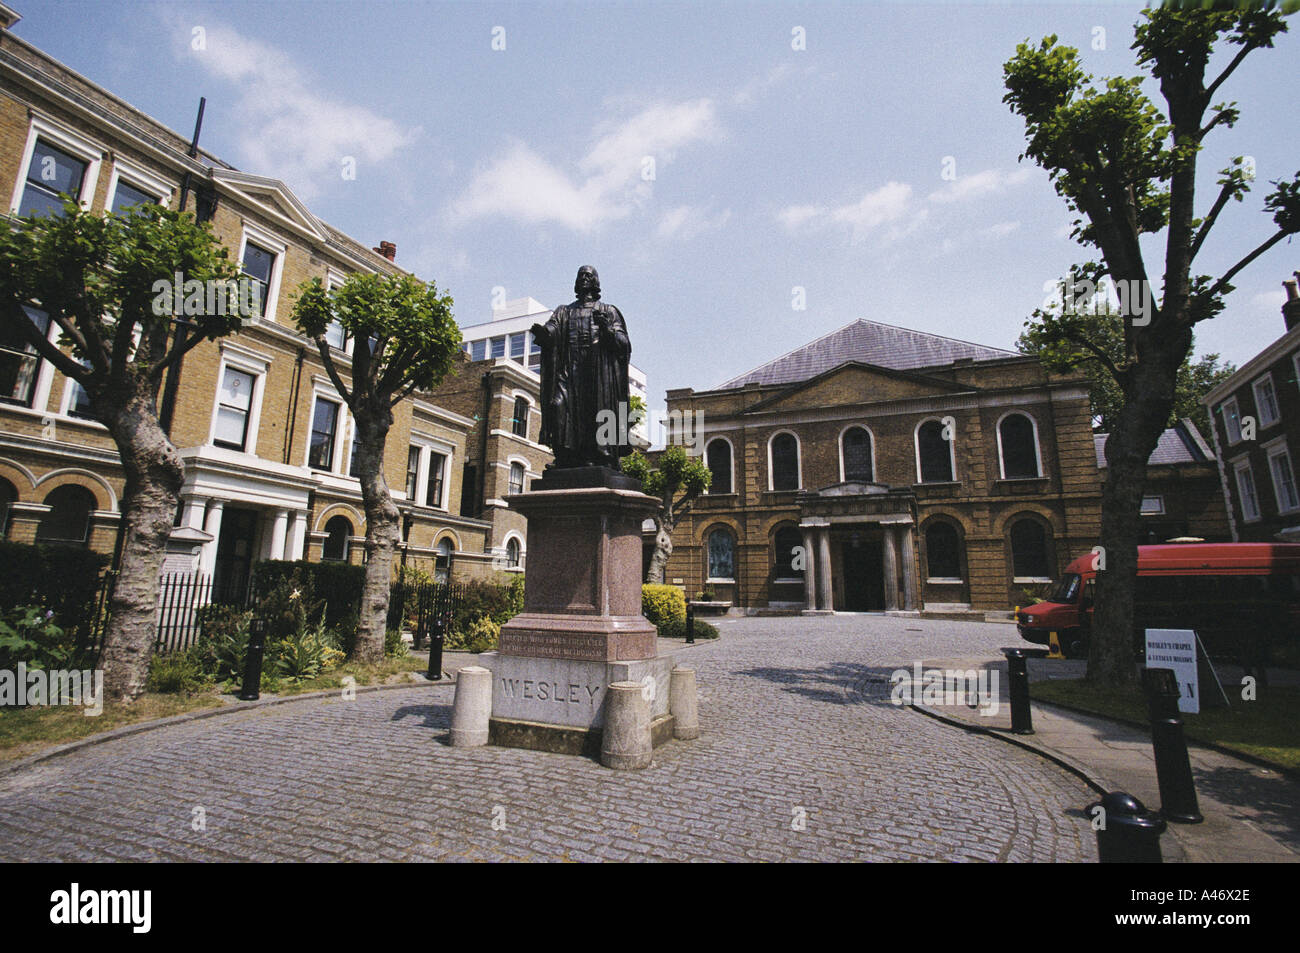 A statue of John Wesley, the founder of Methodism outside the Weslyan Chapel, London, UK Stock Photo